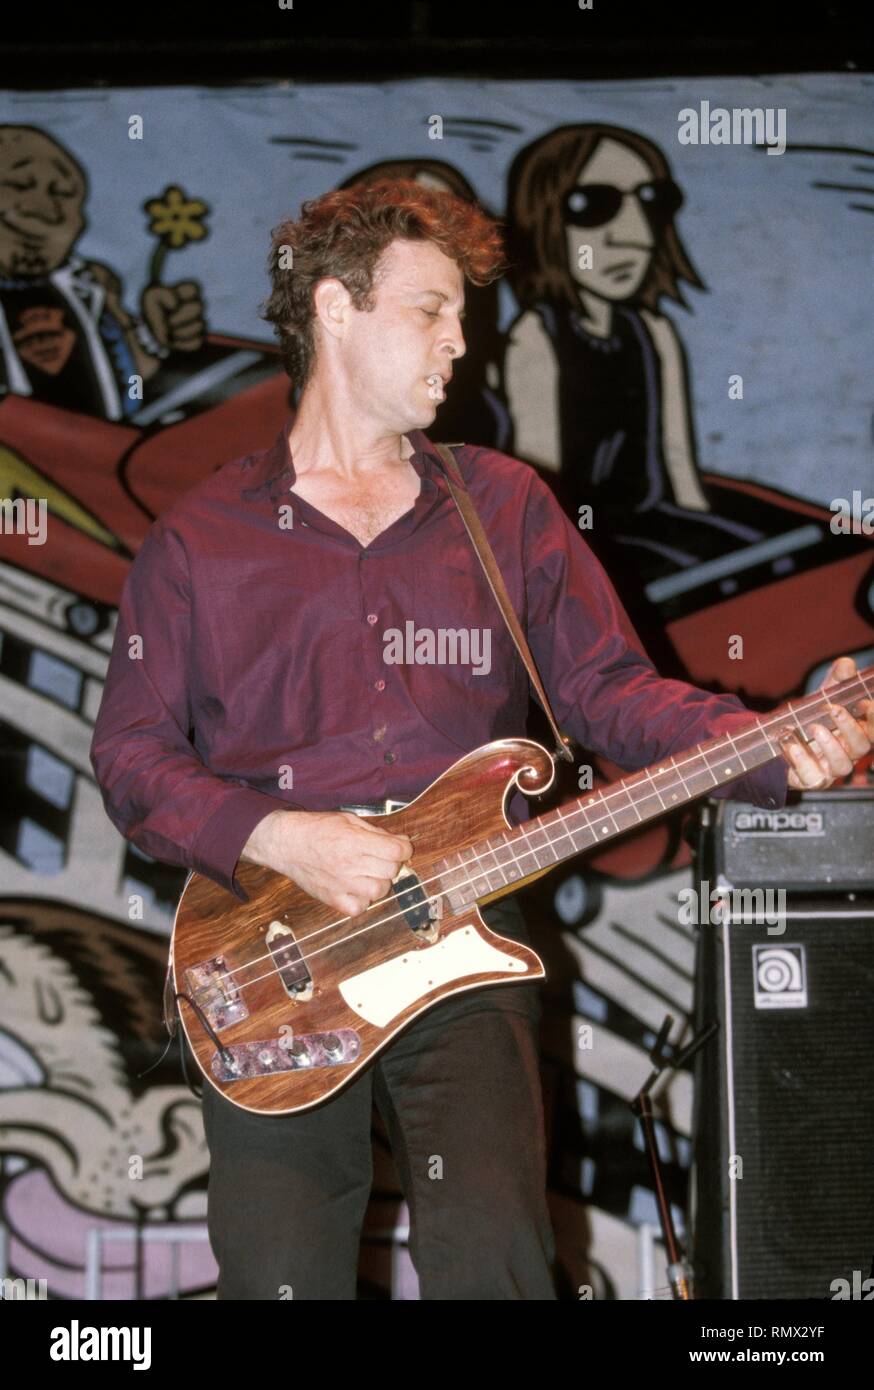 Singer and slide bass player Mark Sandman of the alternative rock group  Morphine is shown performing on stage during a "live" concert appearance  Stock Photo - Alamy